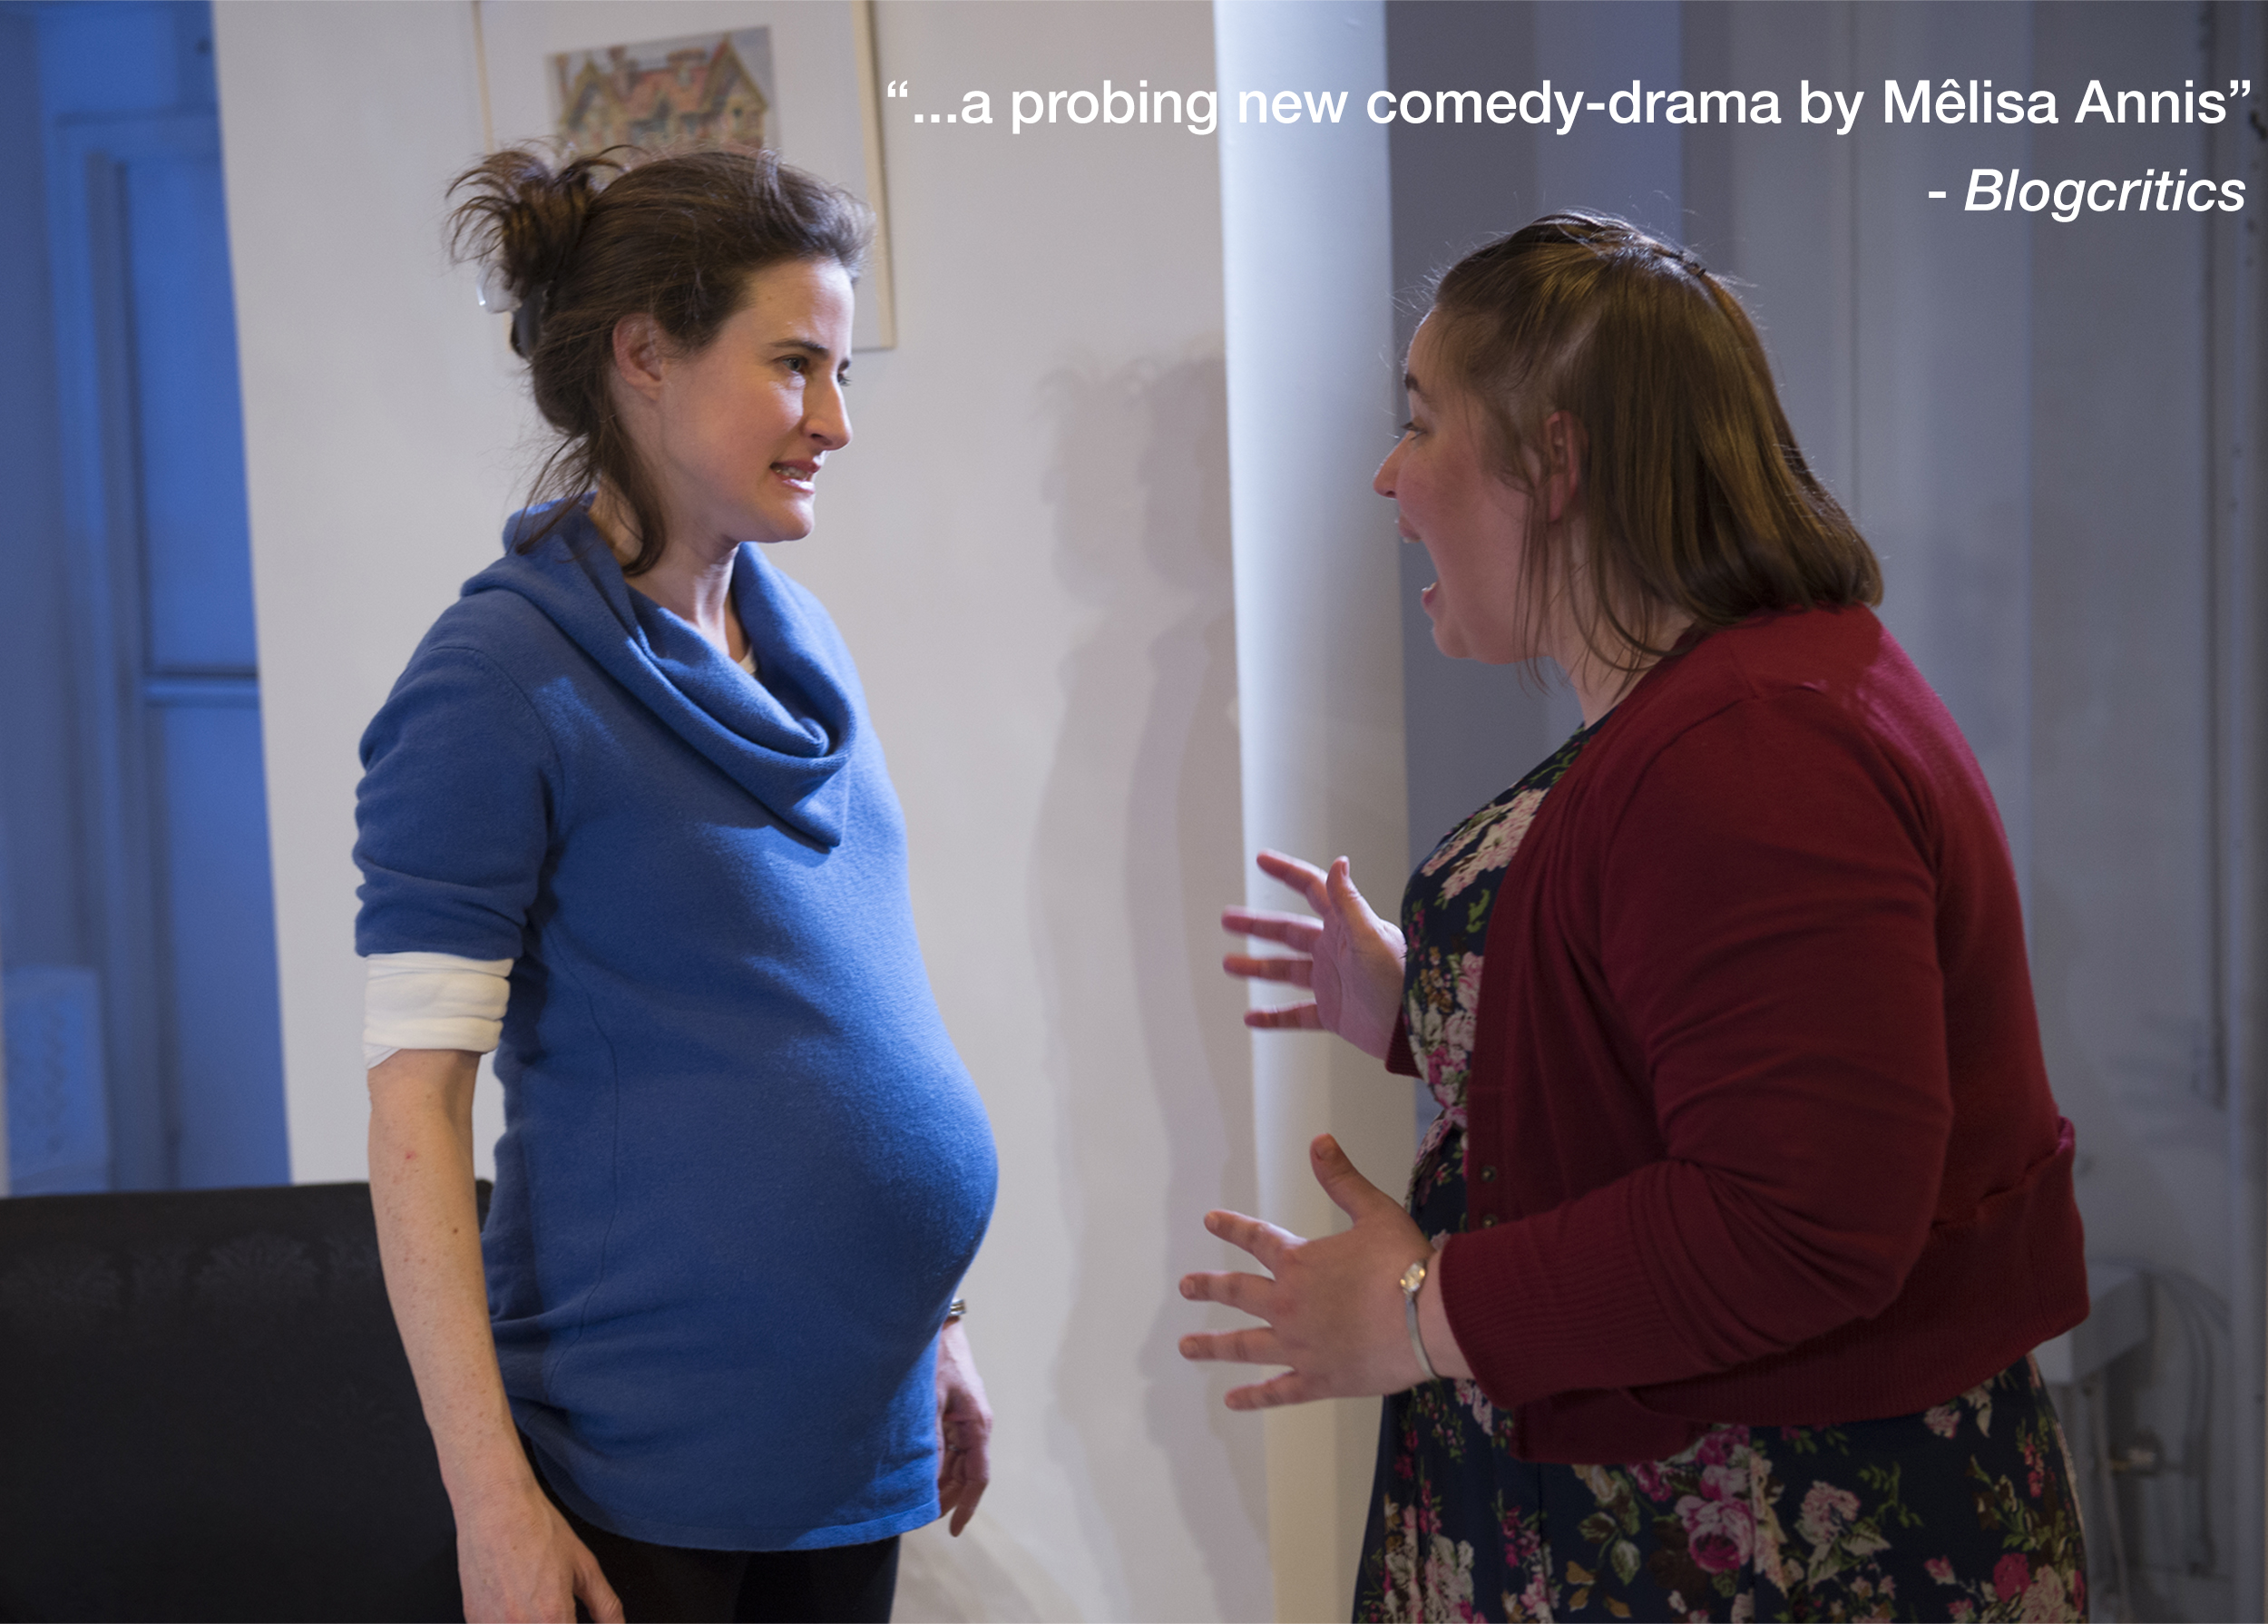  Xanthe Elbrick as "Louise" and Amy Scanlon as "Annie" with press quote “…a probing new comedy-drama by Mêlisa Annis” - Blogcritics 